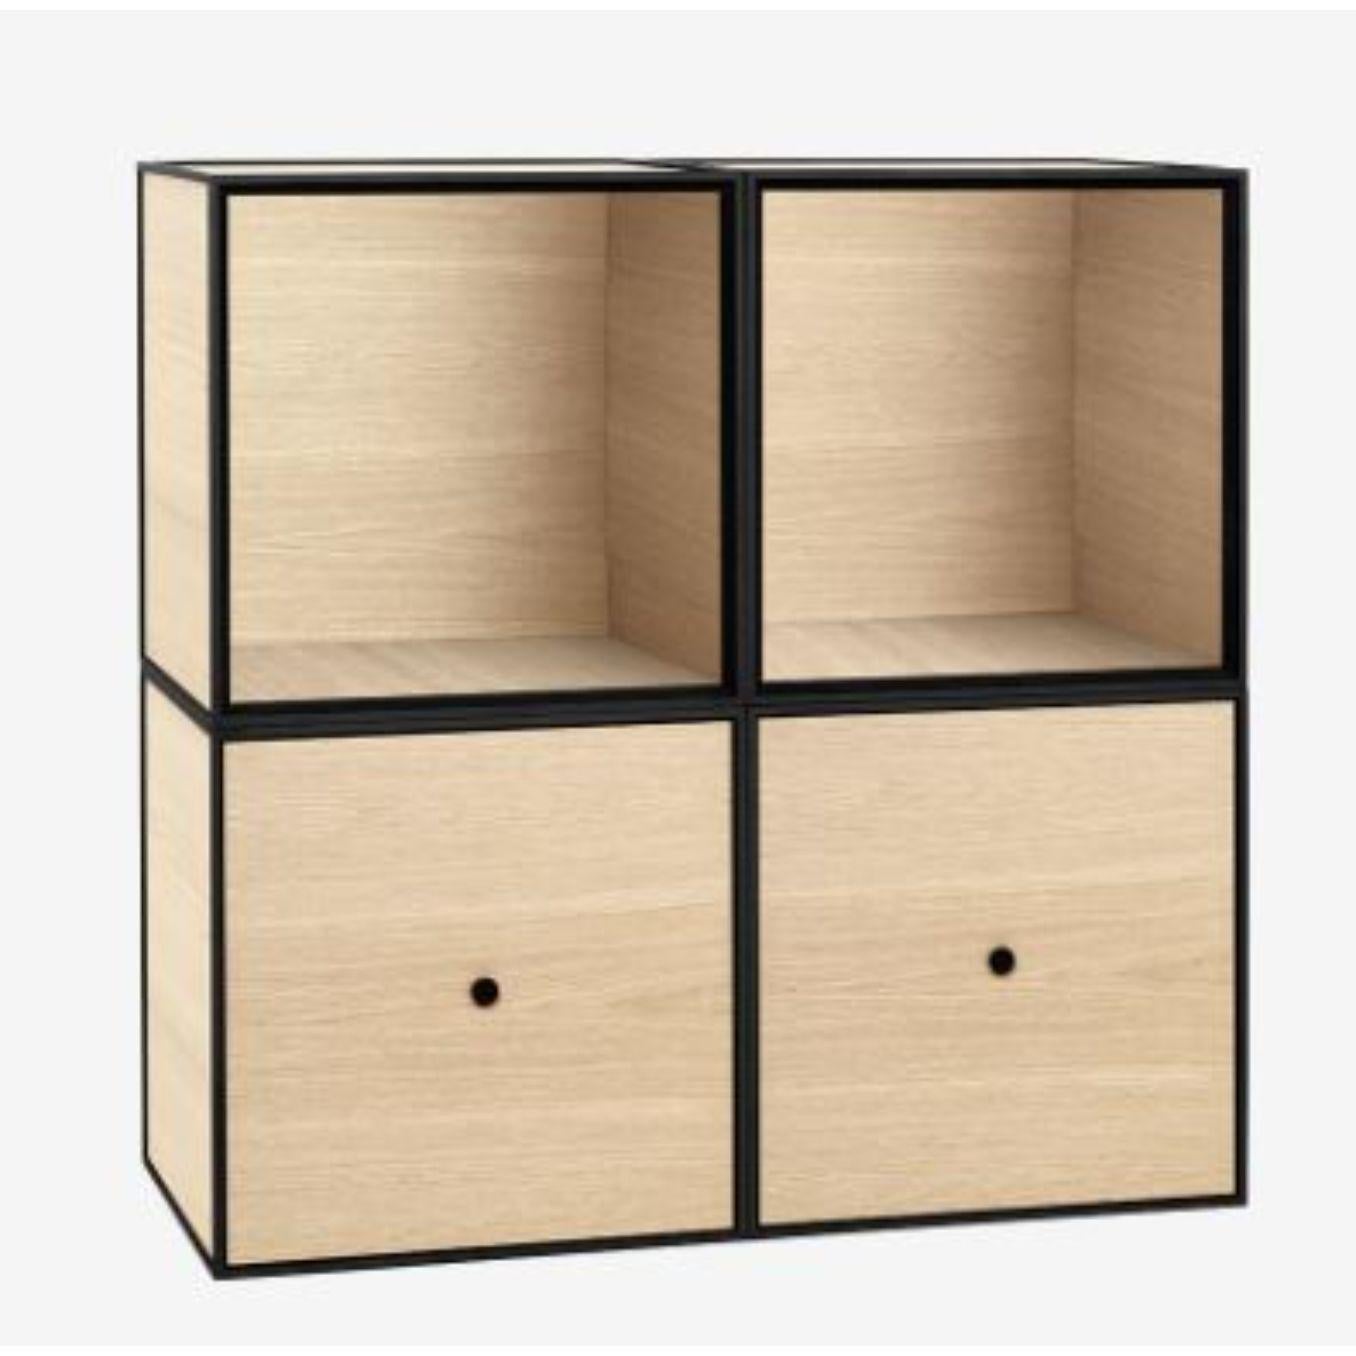 35 Smoked Oak Frame Square Standard Box by Lassen For Sale 3